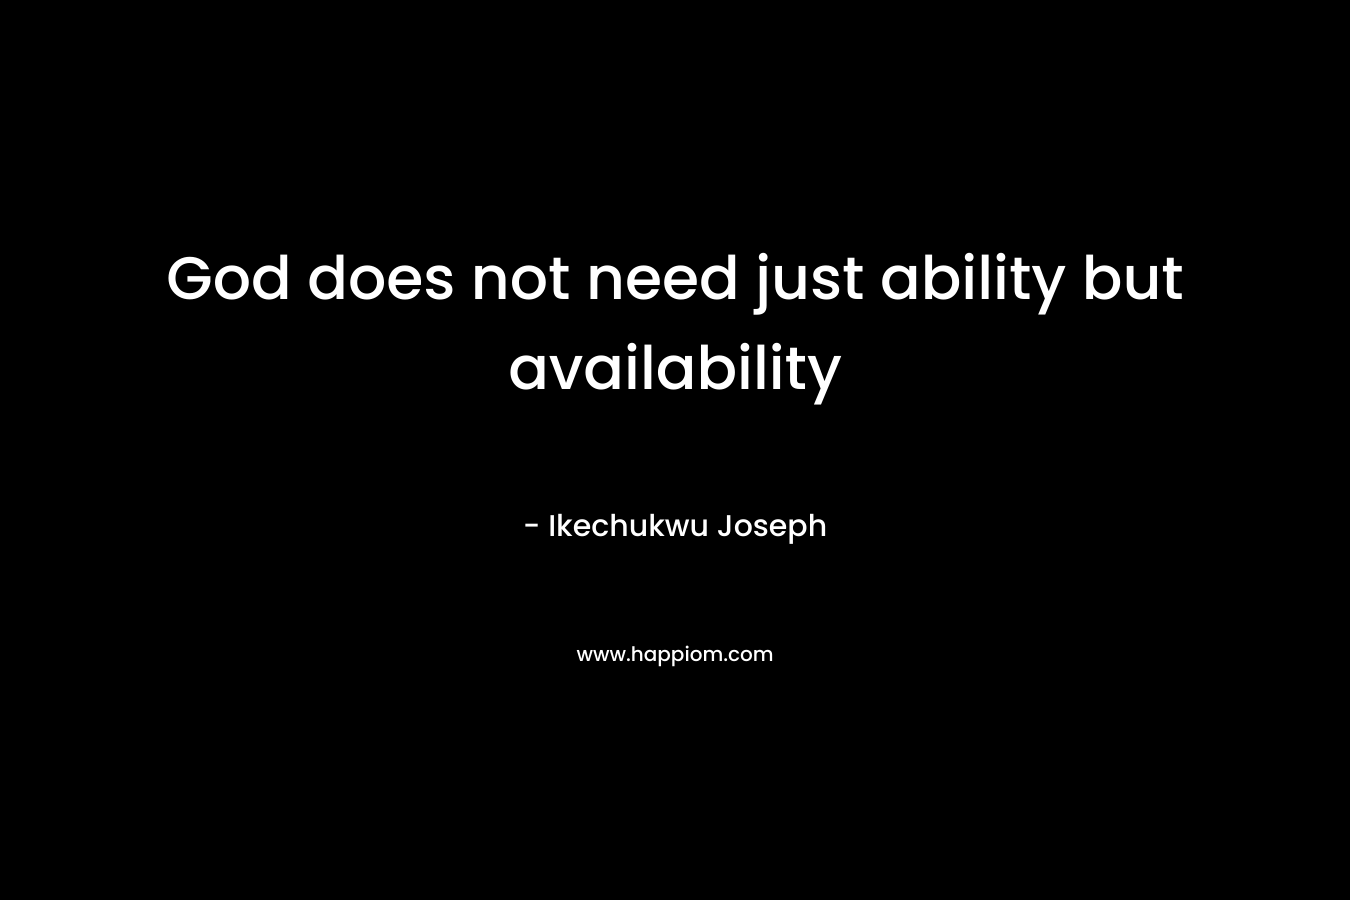 God does not need just ability but availability